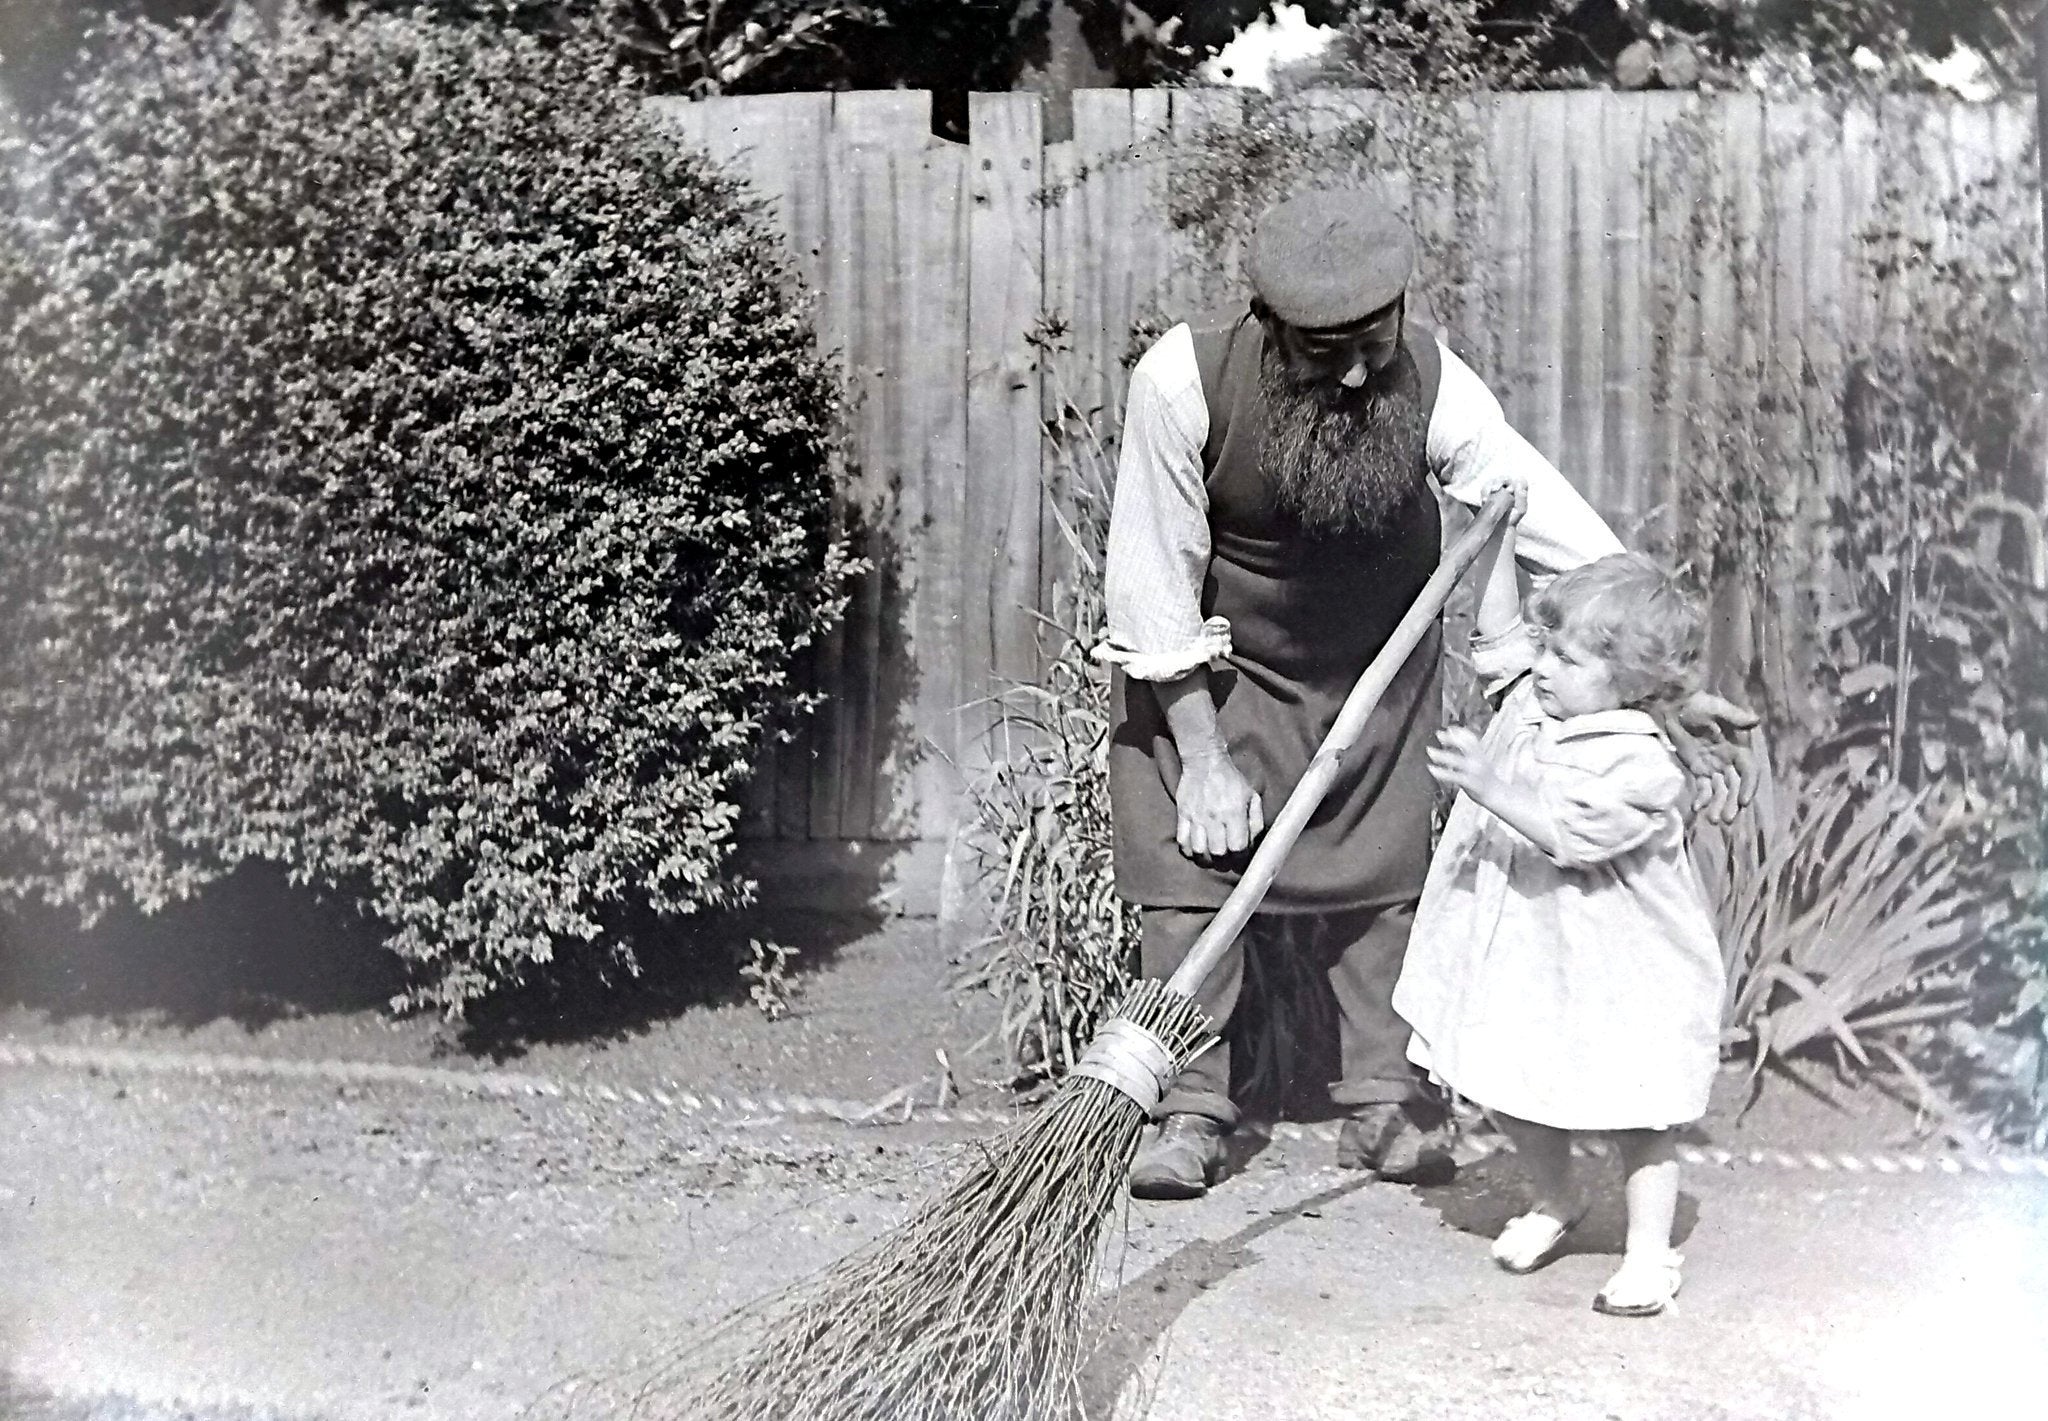 New broom: The old, bearded gardener is lent a hand